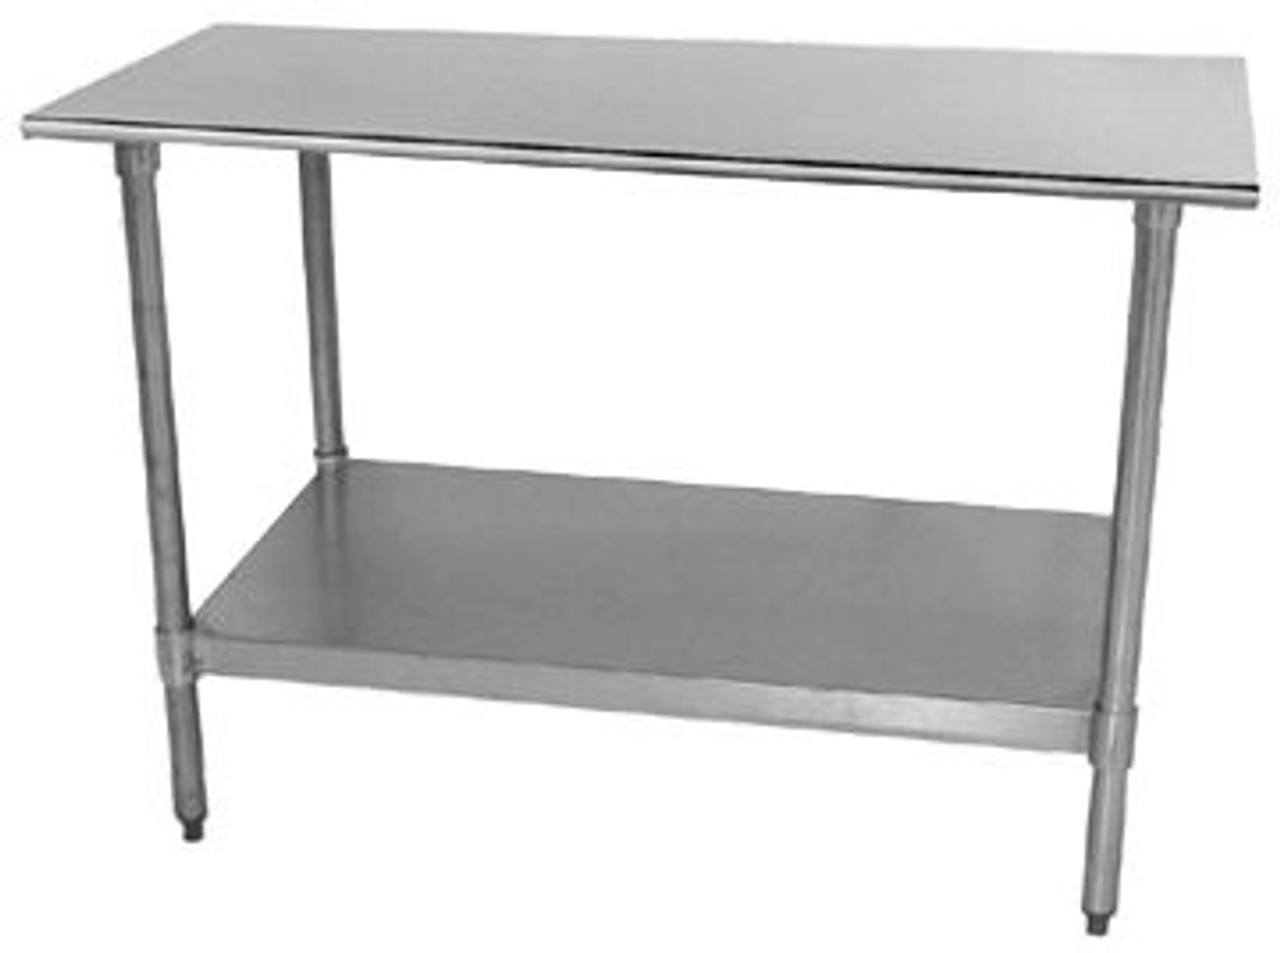 Advance Tabco TTS-242-X 24" x 24" Worktable with Stainless Steel Undershelf